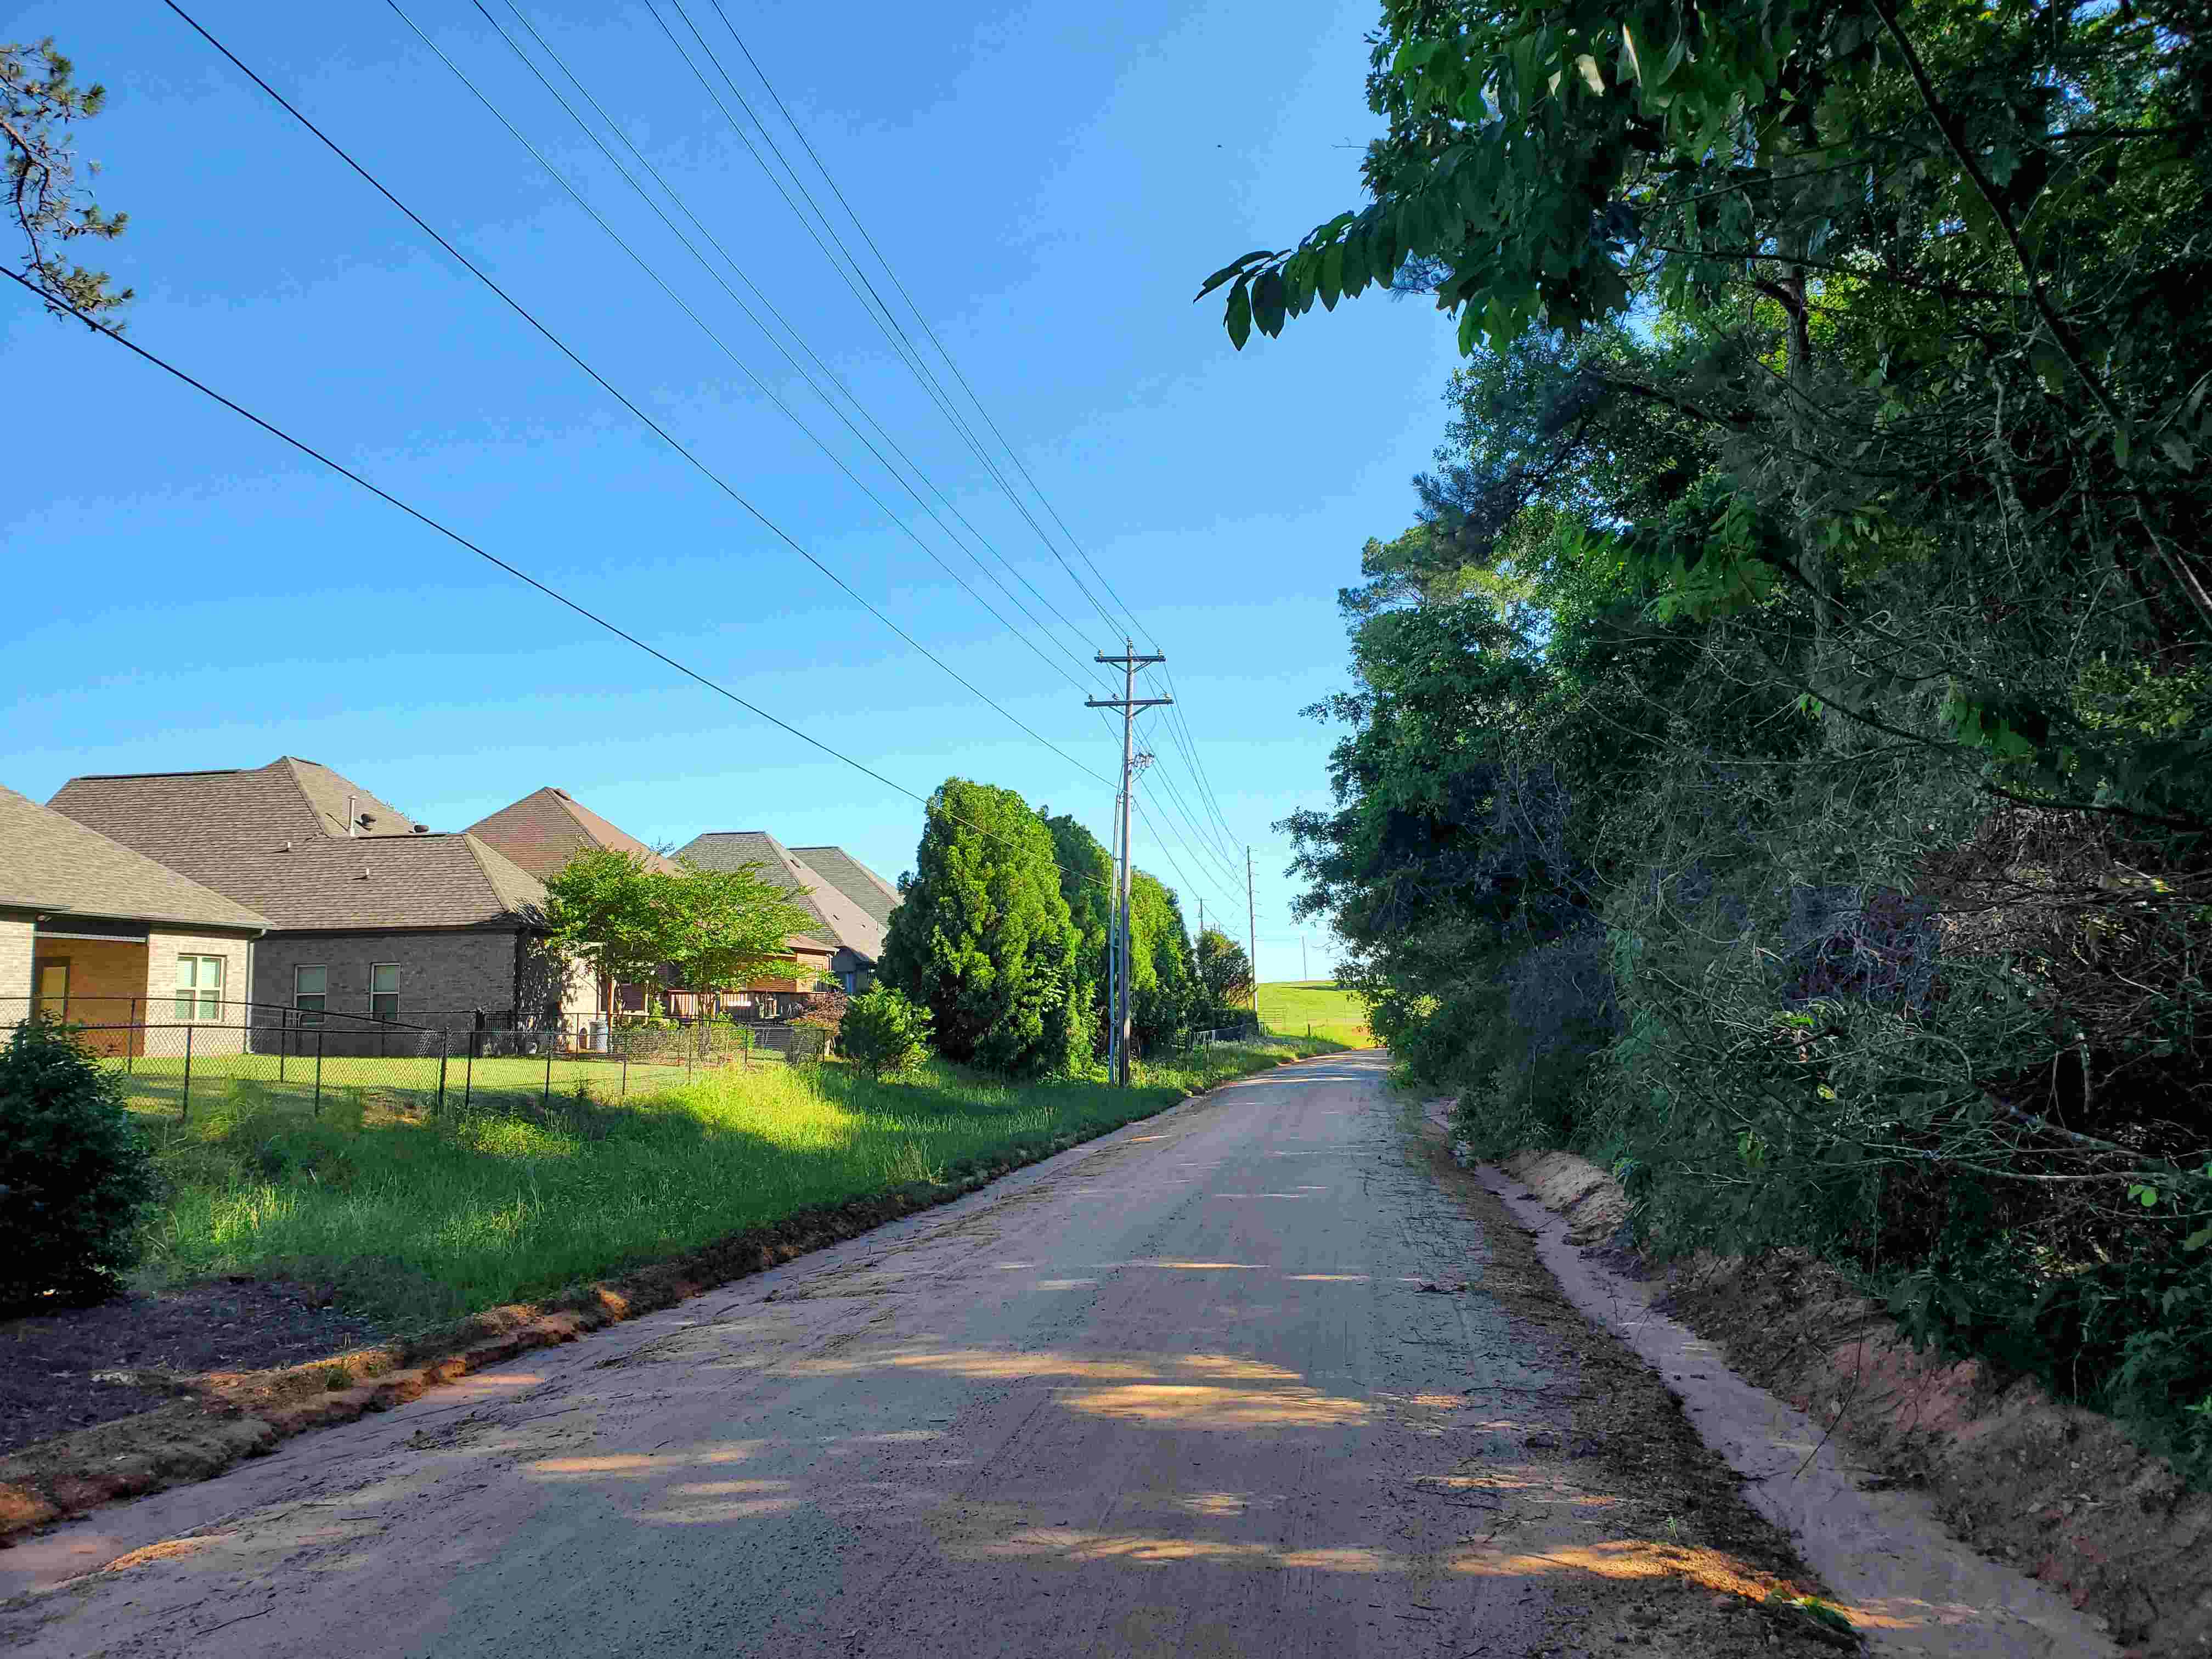 An adjoining subdivision on Pepperwood Trail (property on the right for 1,000 ft)